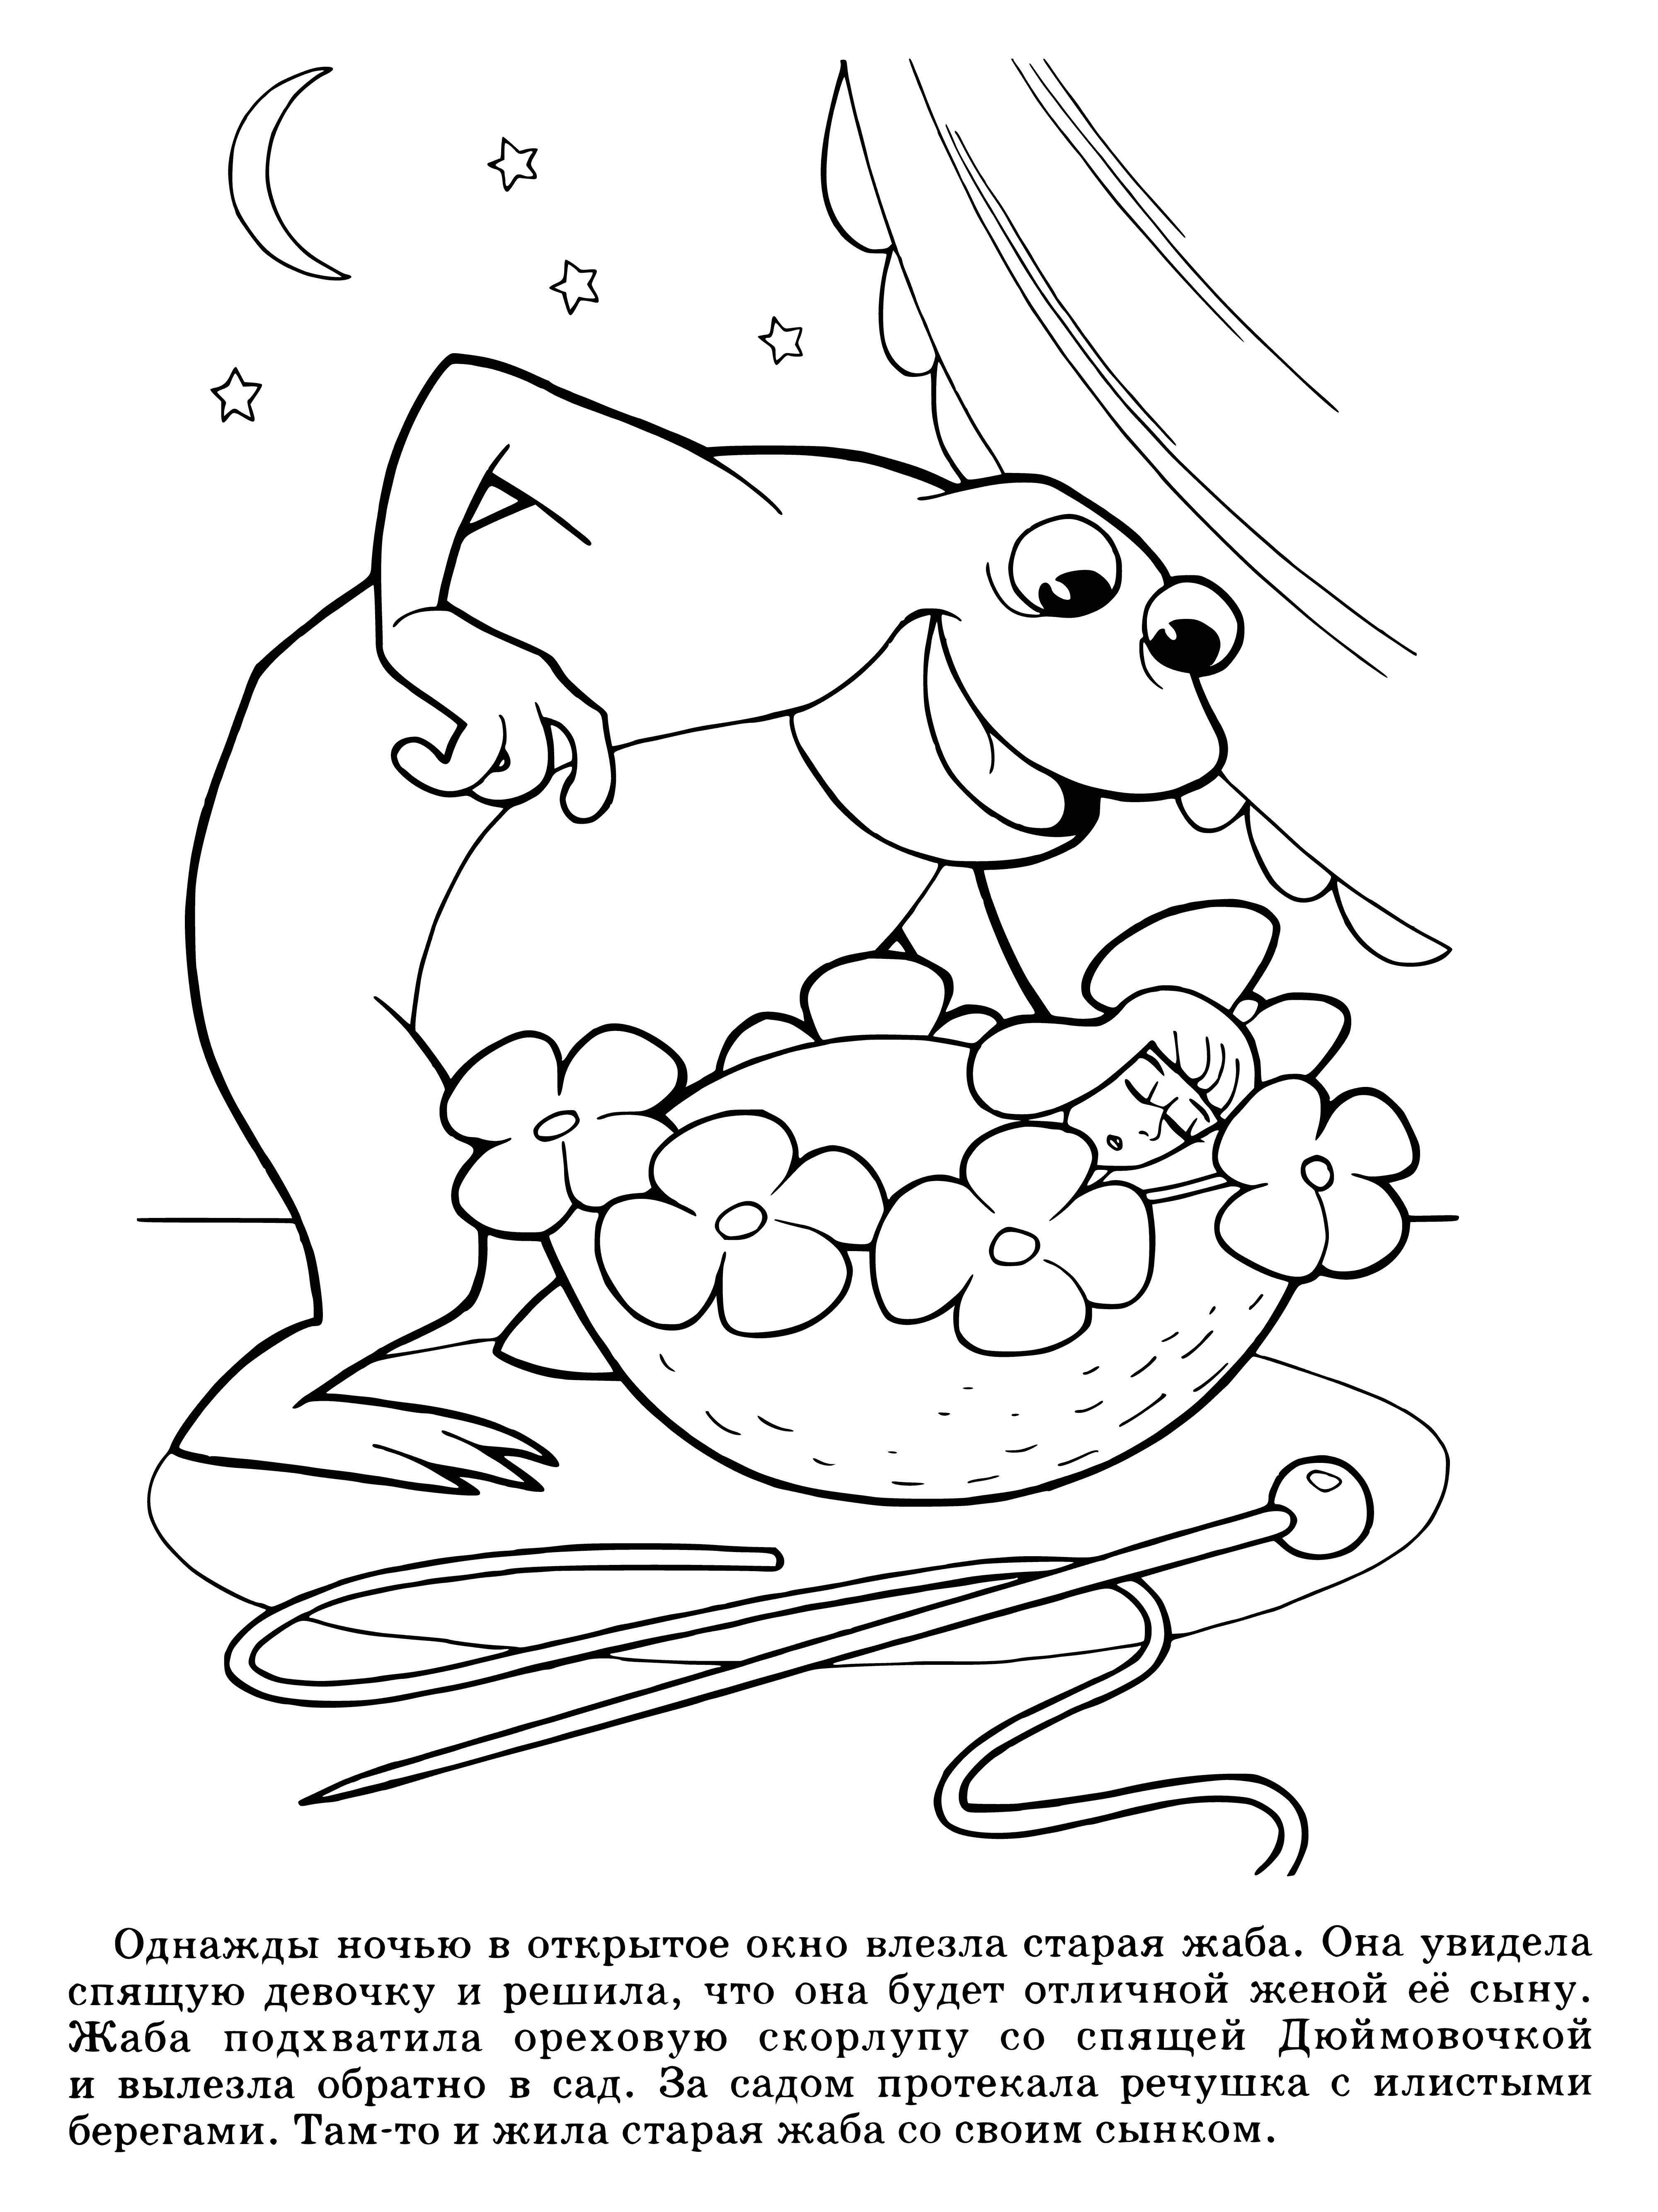 The toad saw Thumbelina coloring page